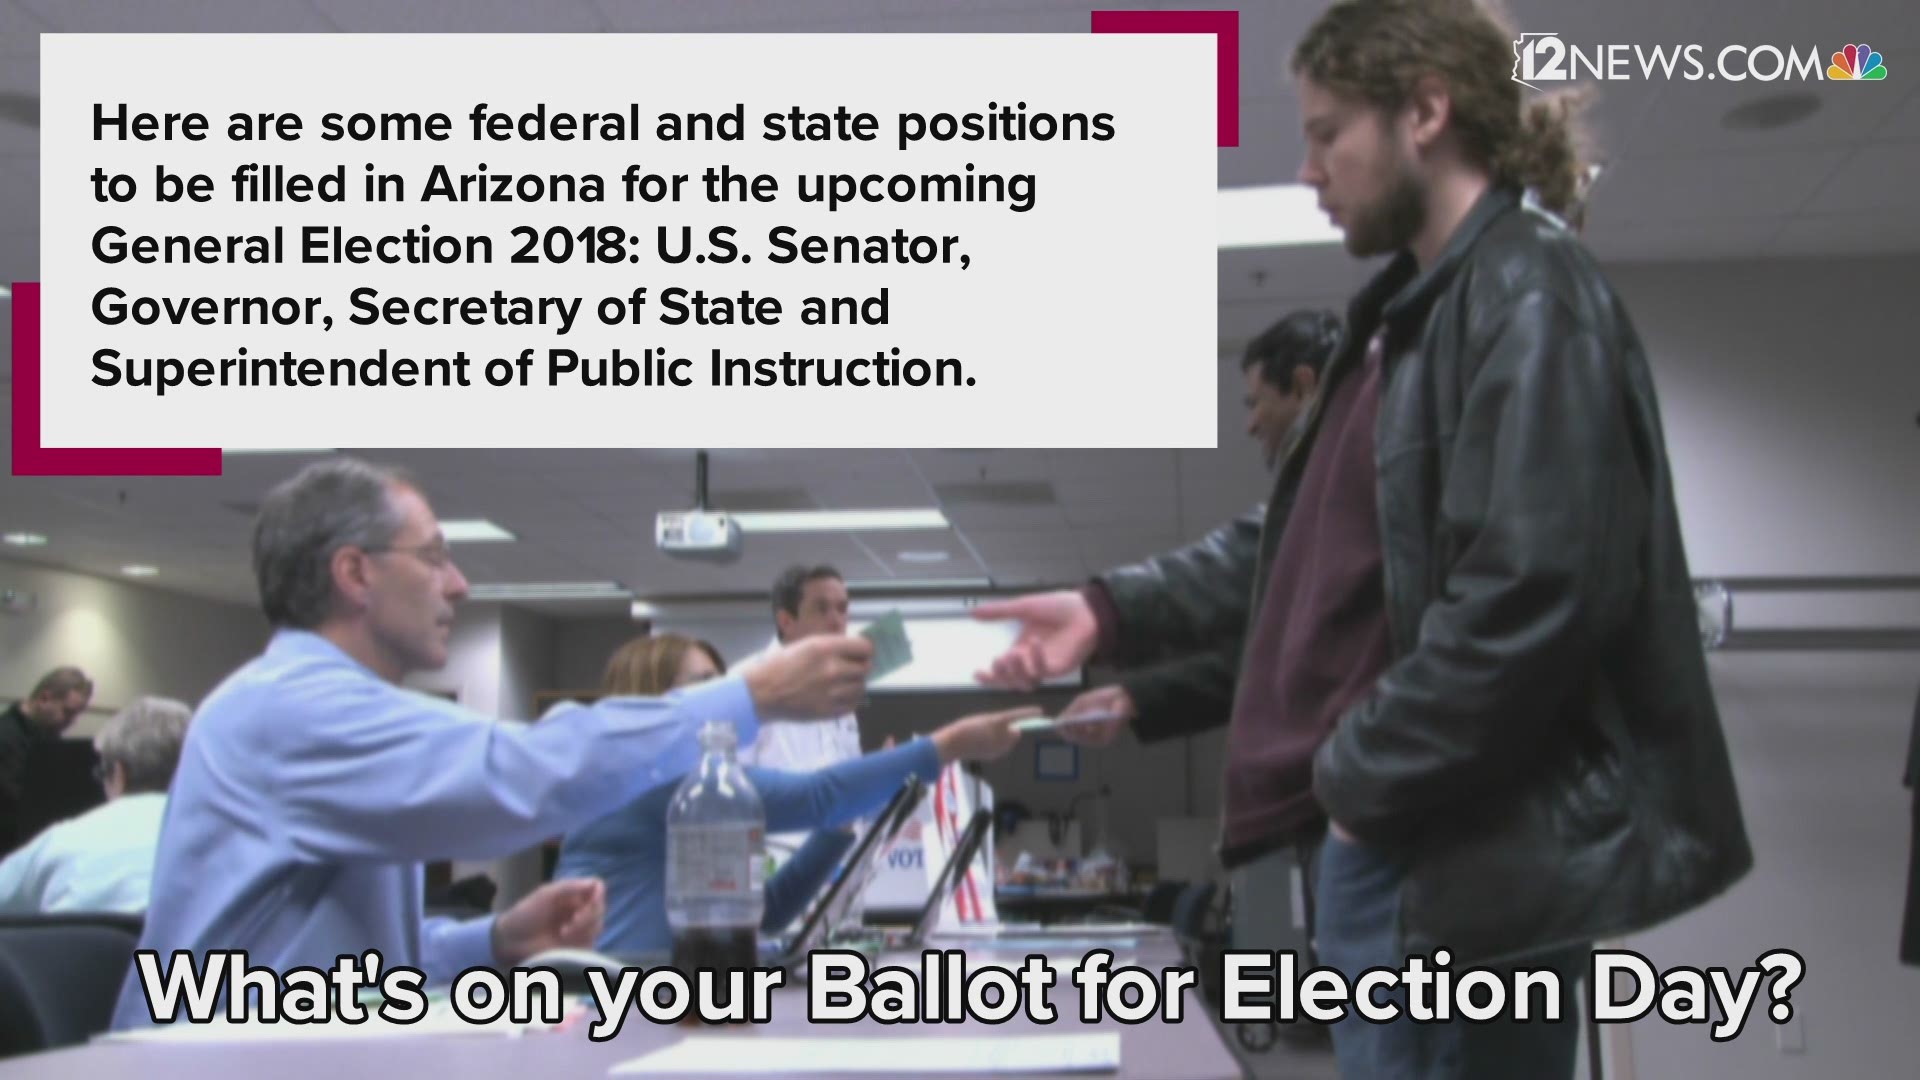 Here are some of the federal and state positions to be filled in Arizona for the upcoming special/ general election on Nov. 6